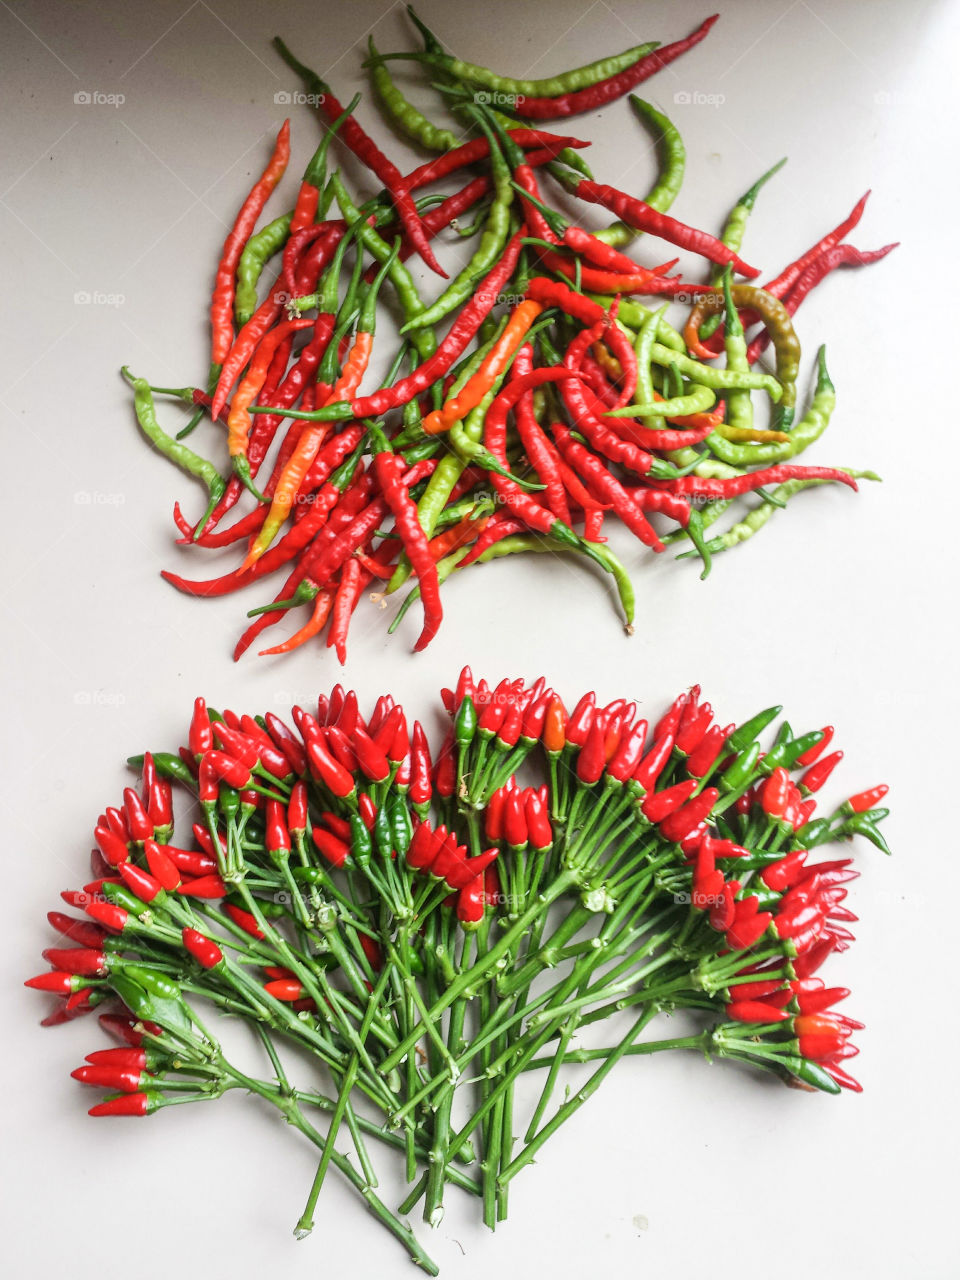 Close-up of red chillis